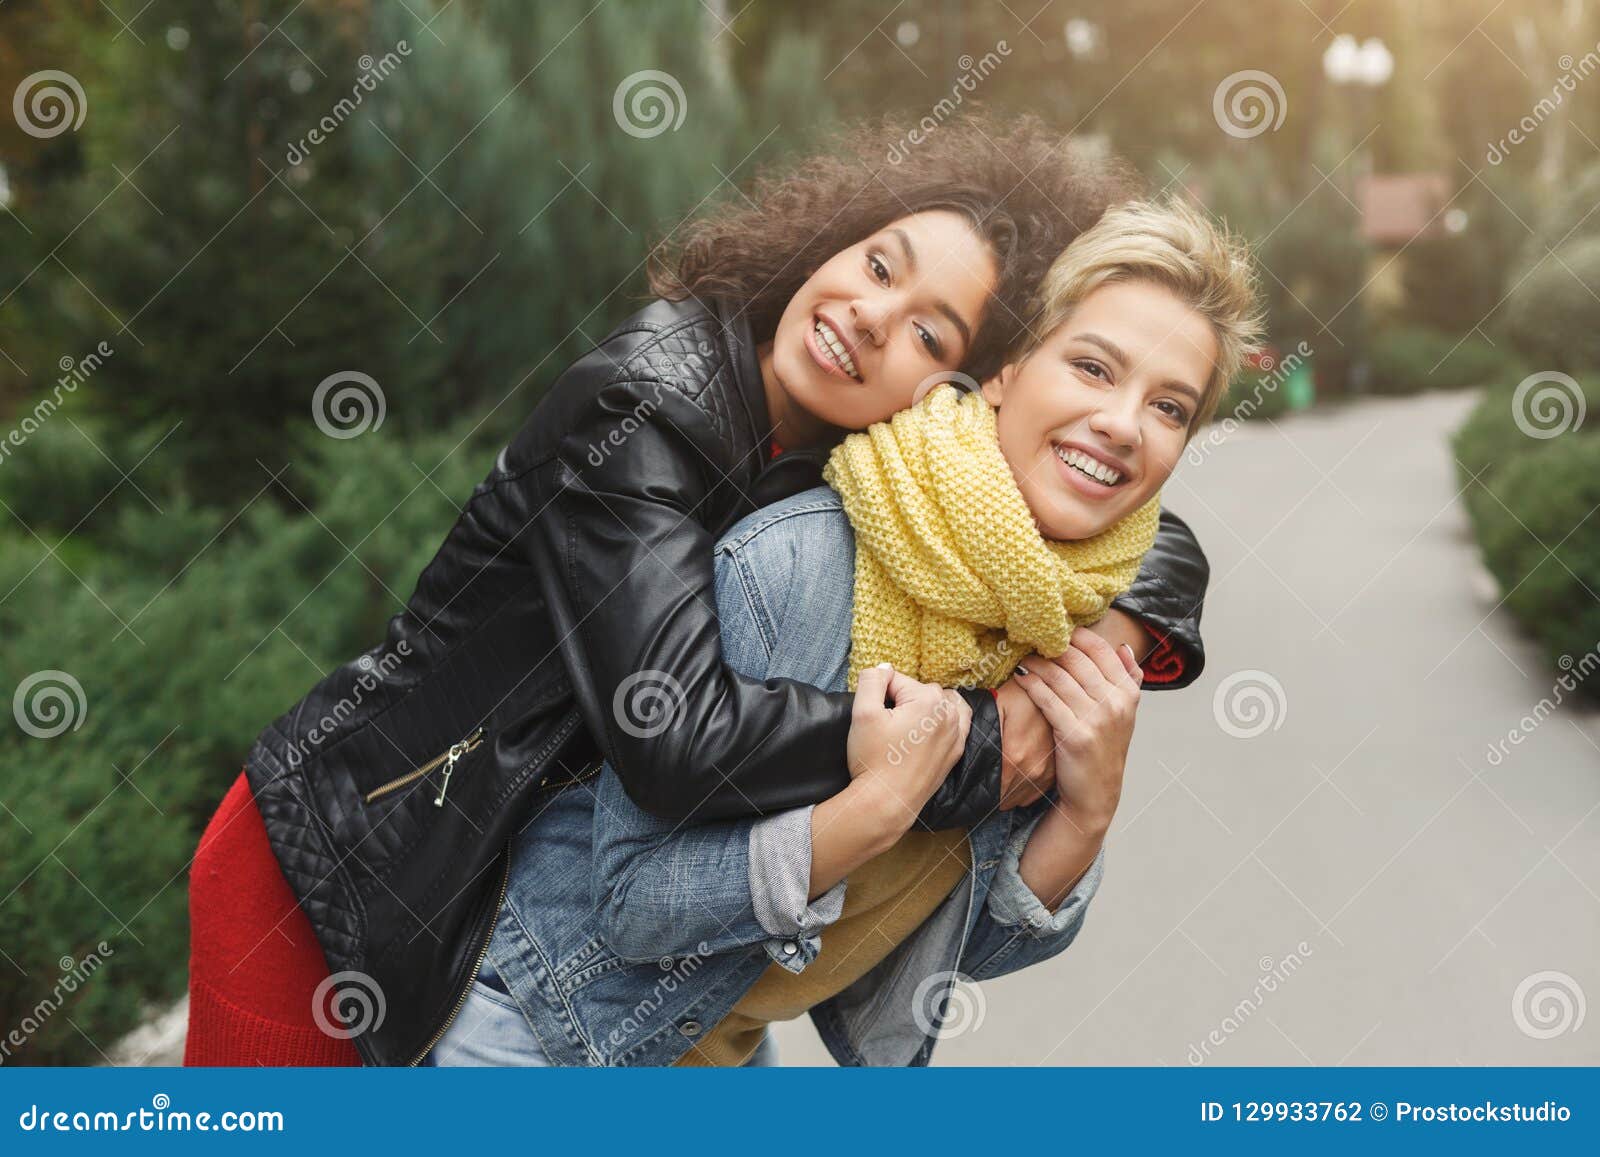 Happy Girls Having Fun While Walking In The Park Stock